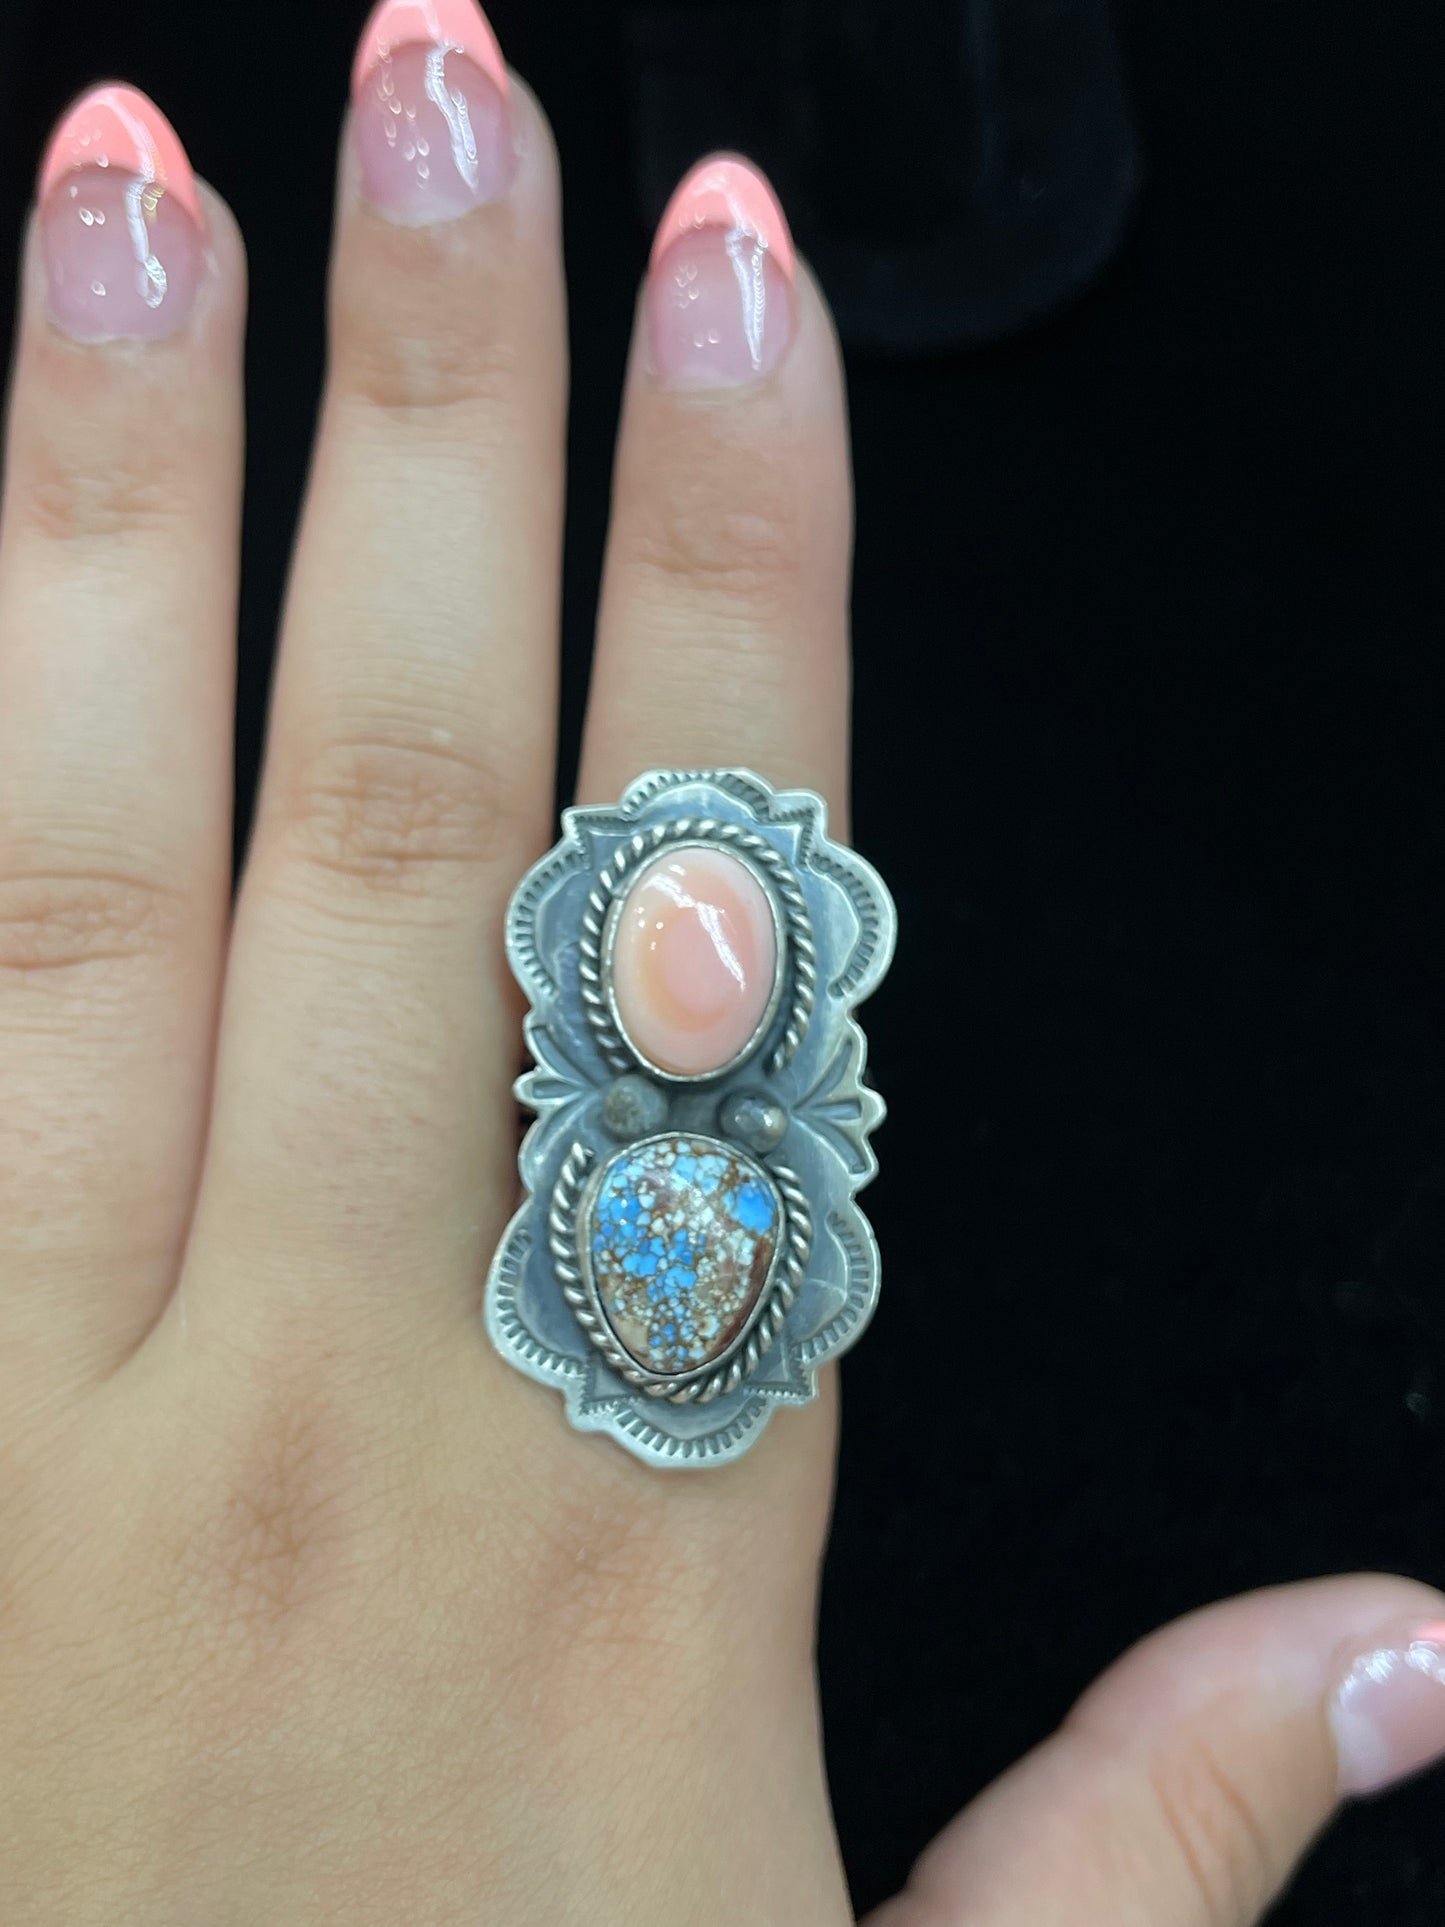 10.5 Pink Conch Shell & Golden Hills Turquoise by Boyd Ashley, Navajo